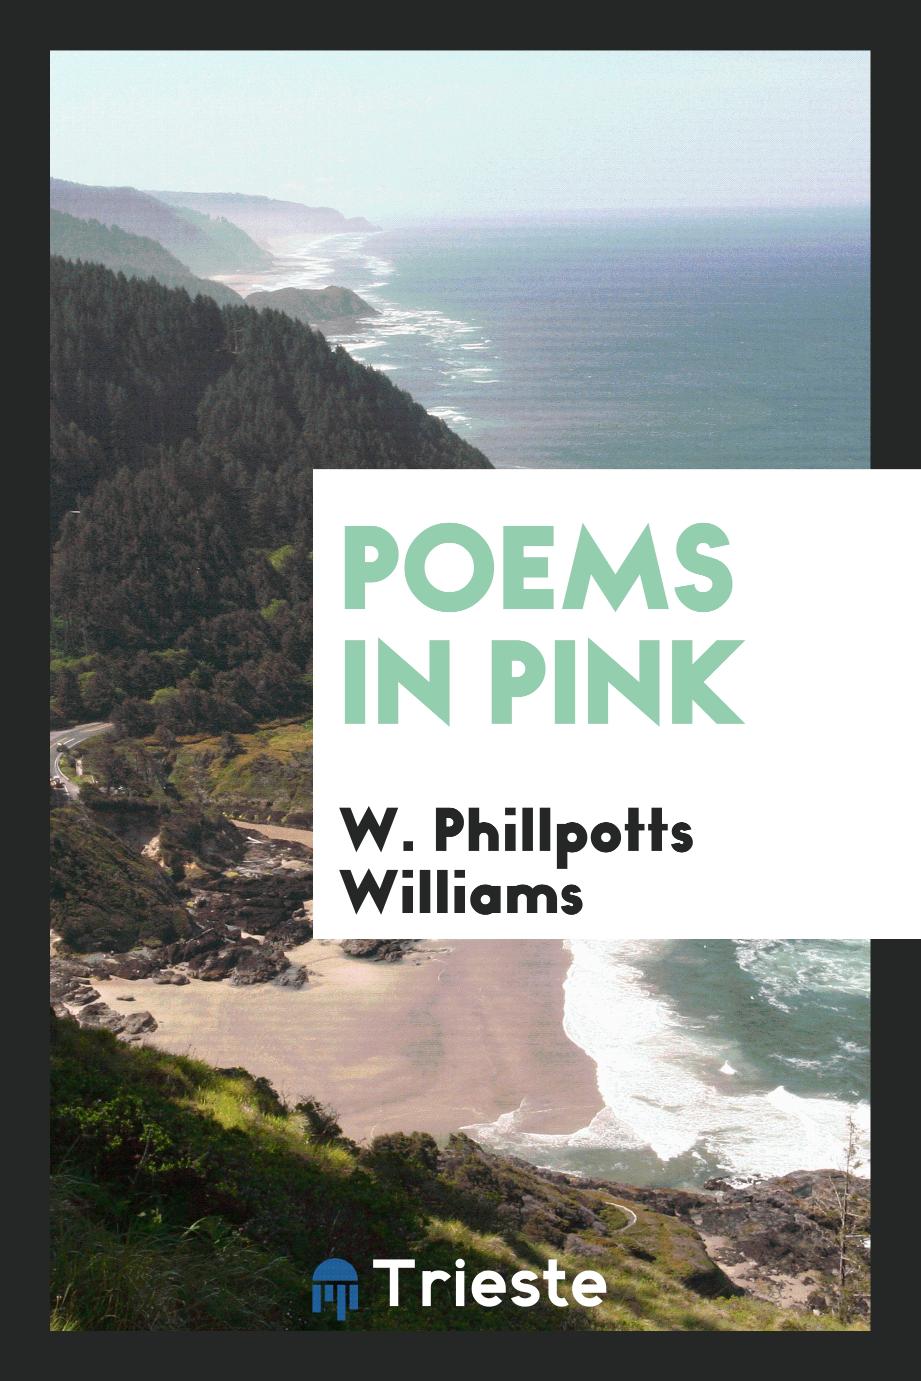 Poems in Pink